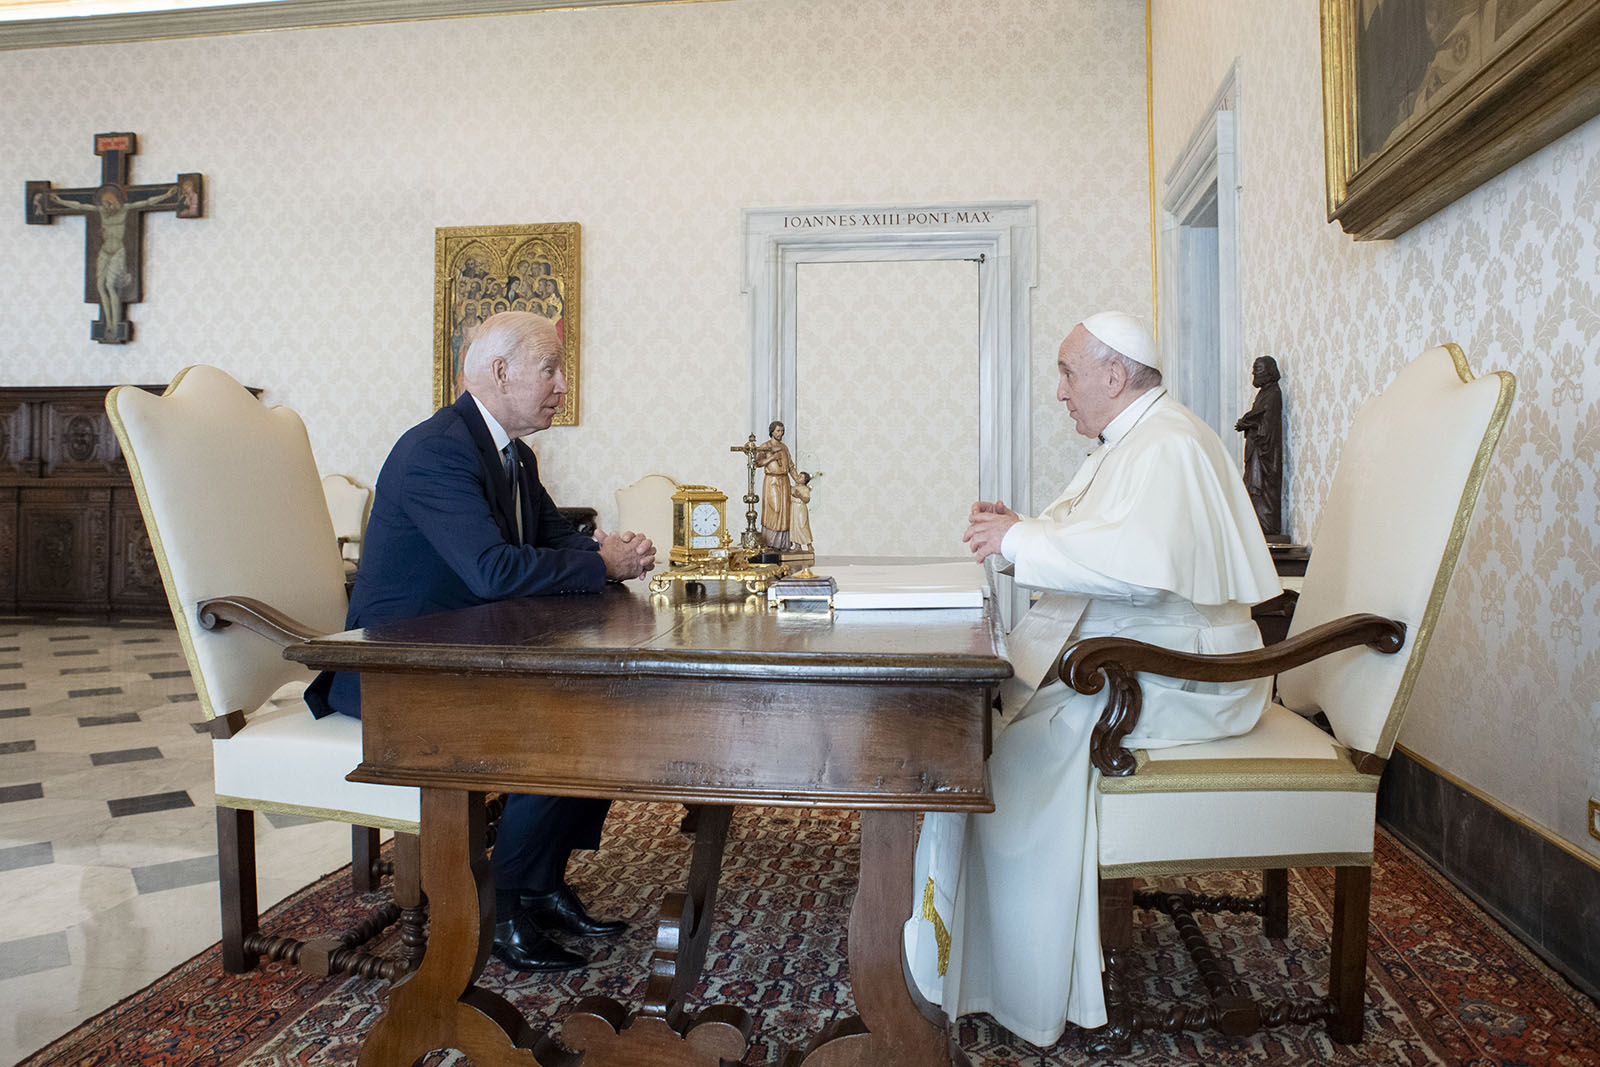 President Joe Biden, left, talks with Pope Francis as they meet at the Vatican, Friday, Oct. 29, 2021. (Photo by Vatican Media)